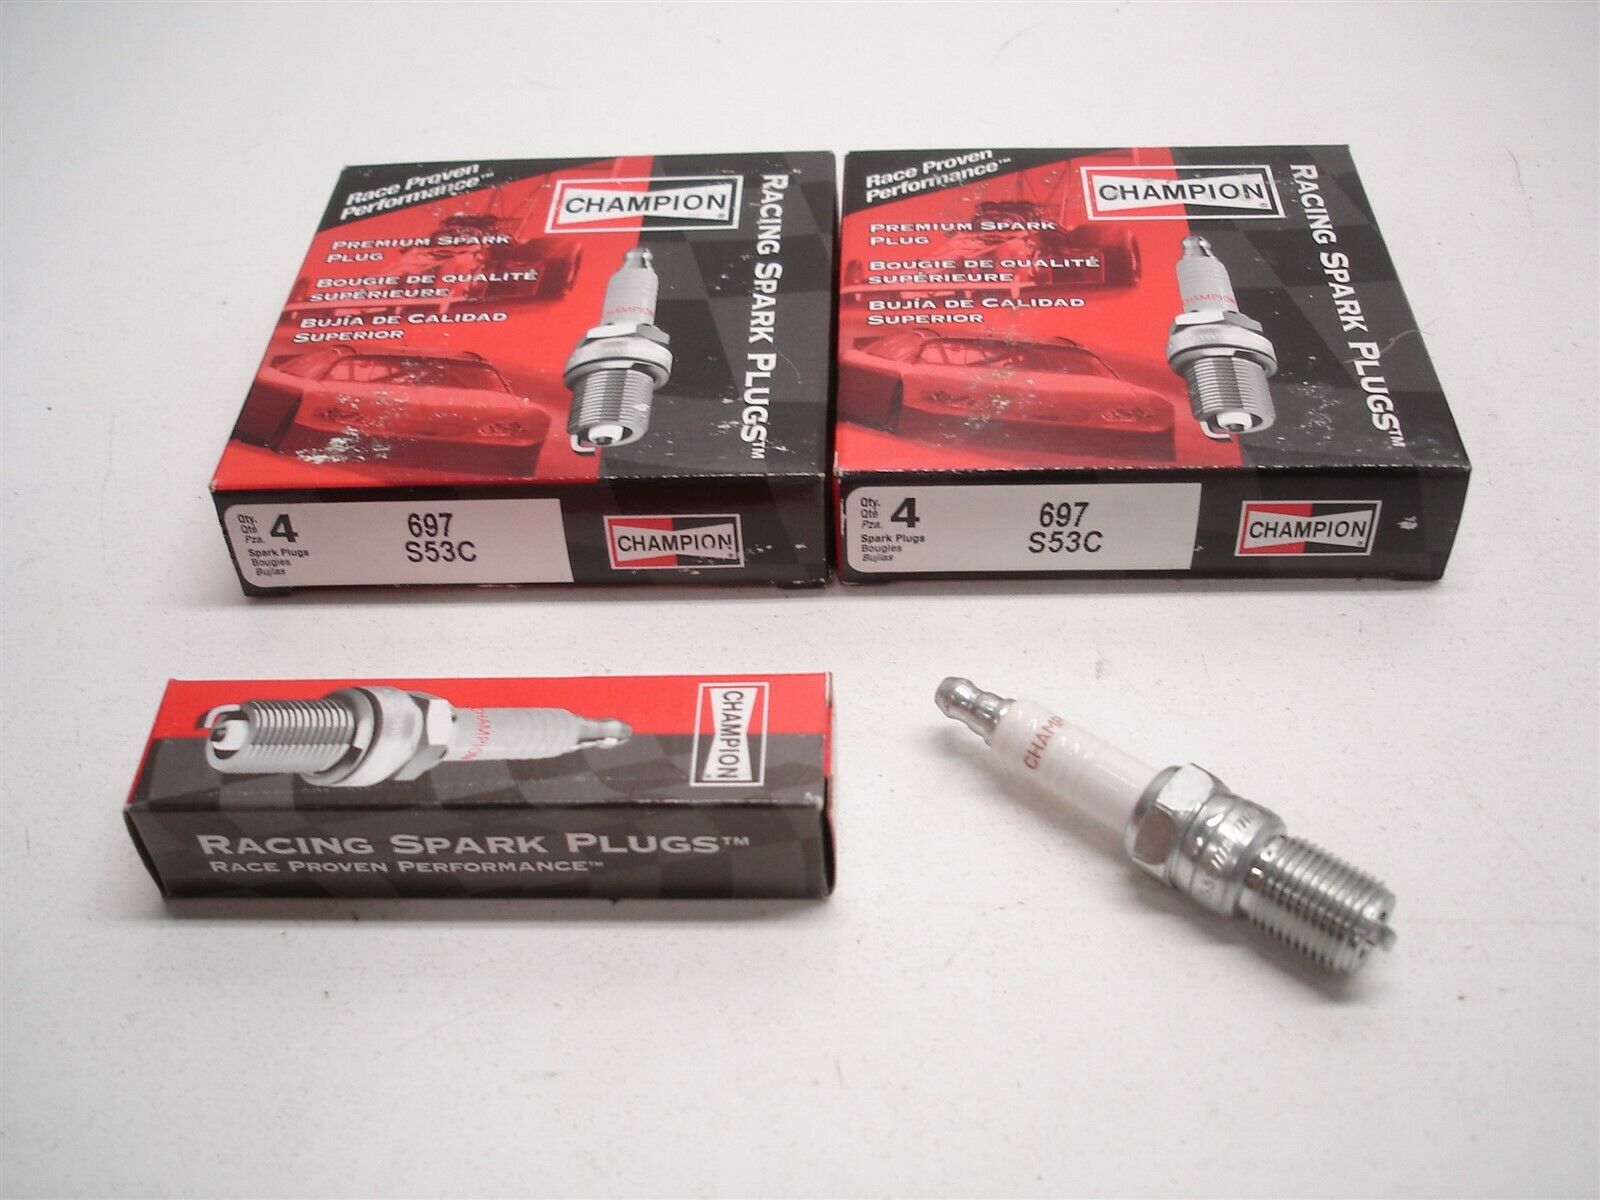 8 New Nascar Champion S53c Racing Spark Plugs - 14mm Tapered Seat .709" Reach